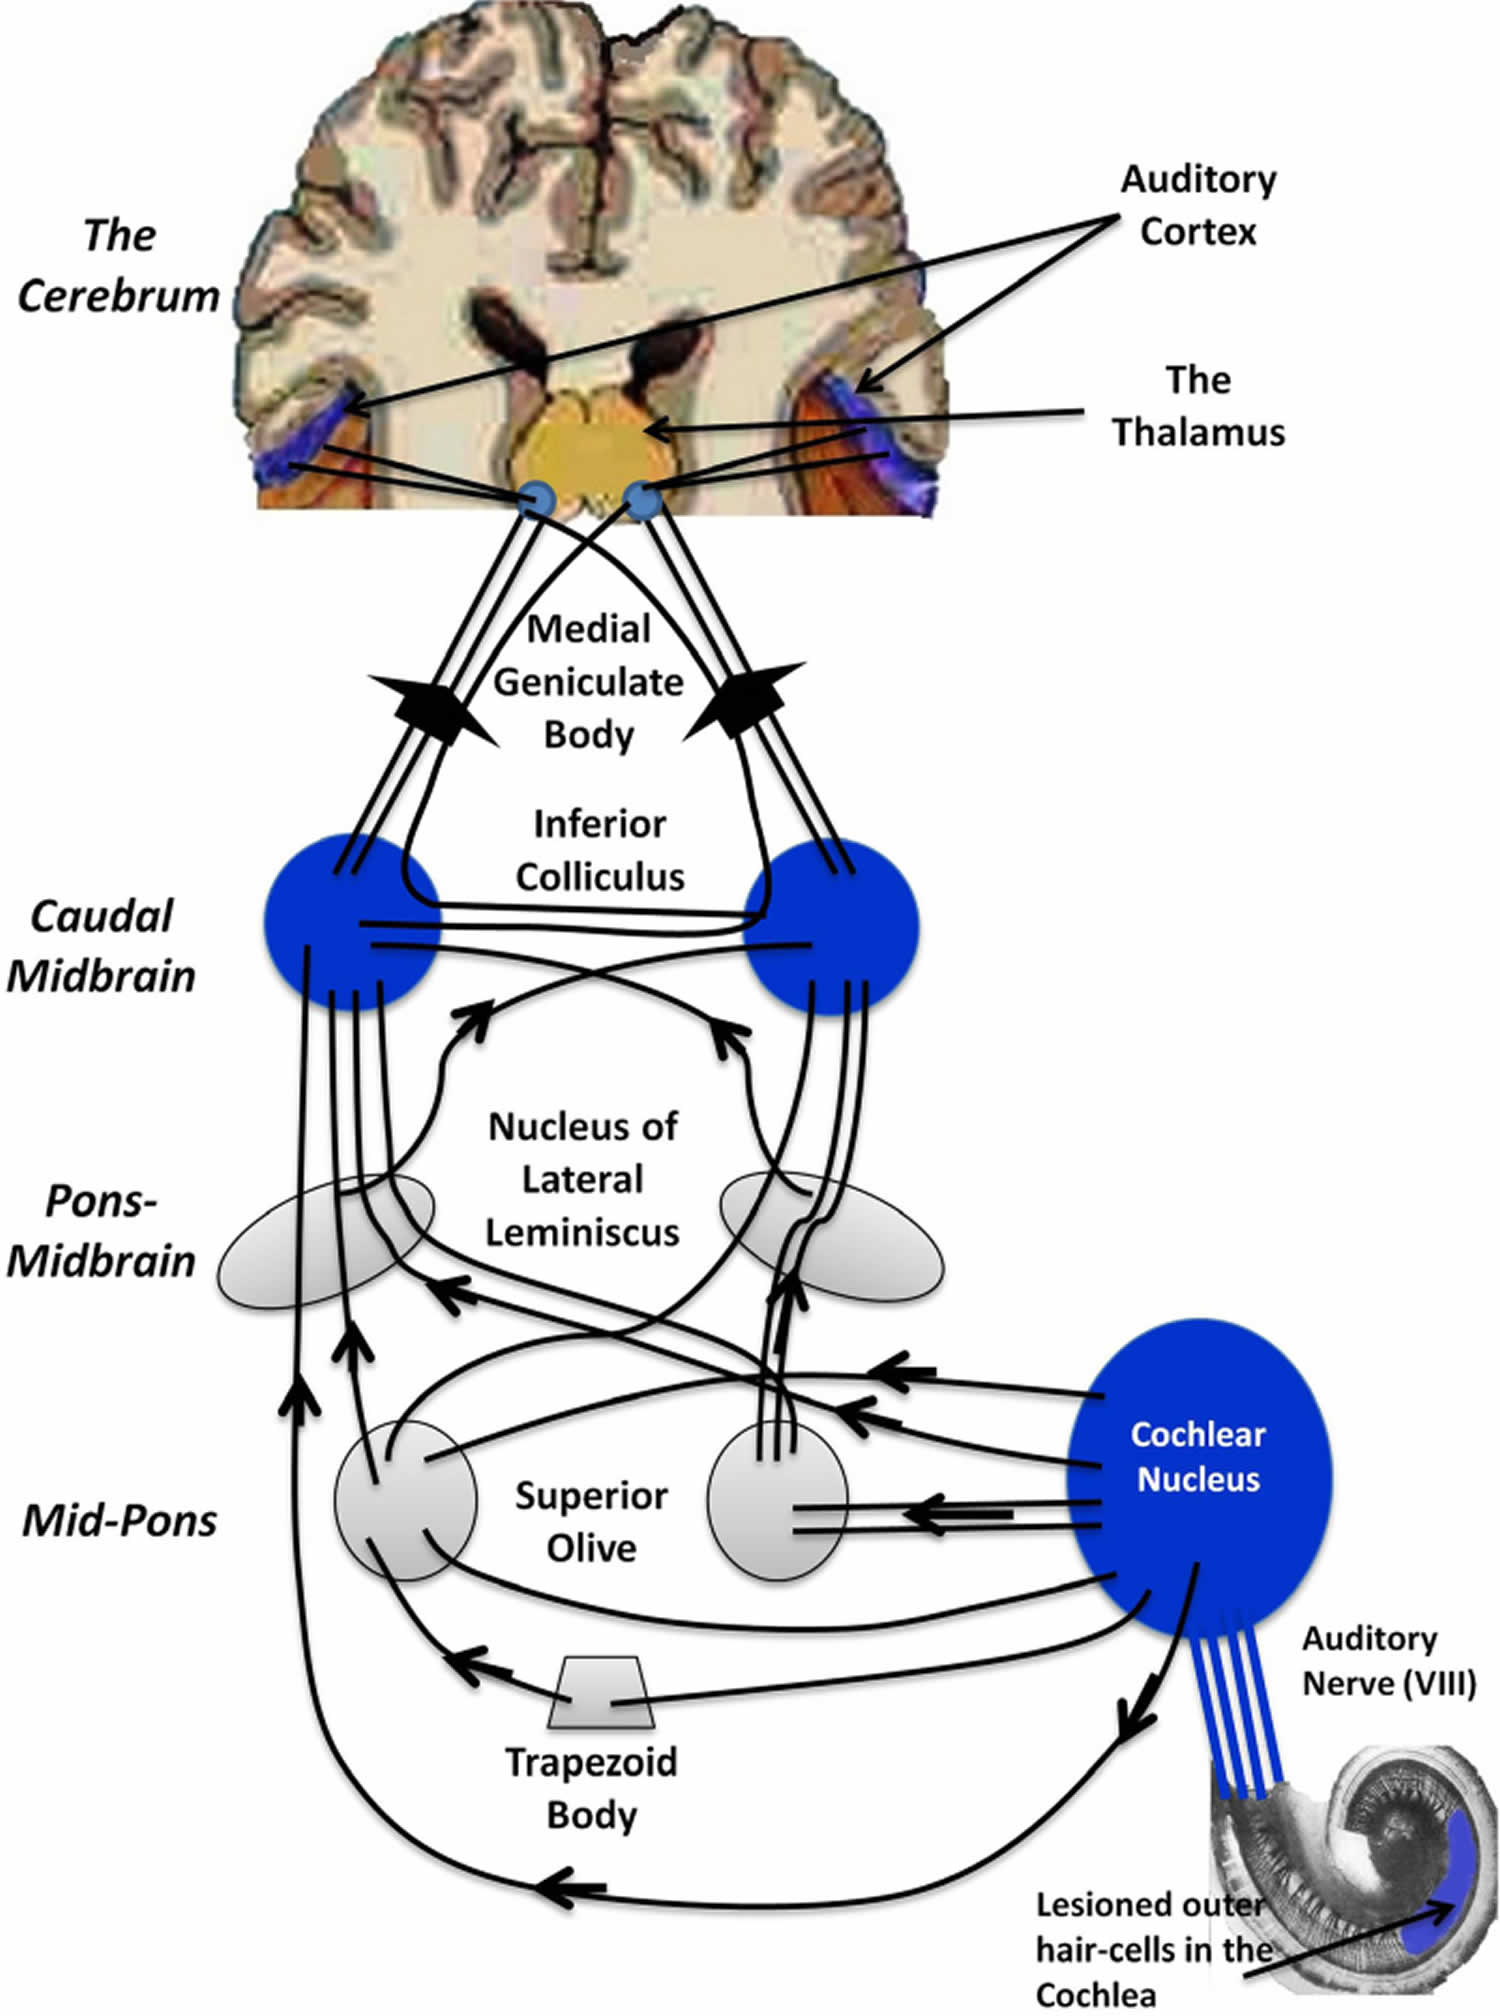 Peripheral and central auditory pathways